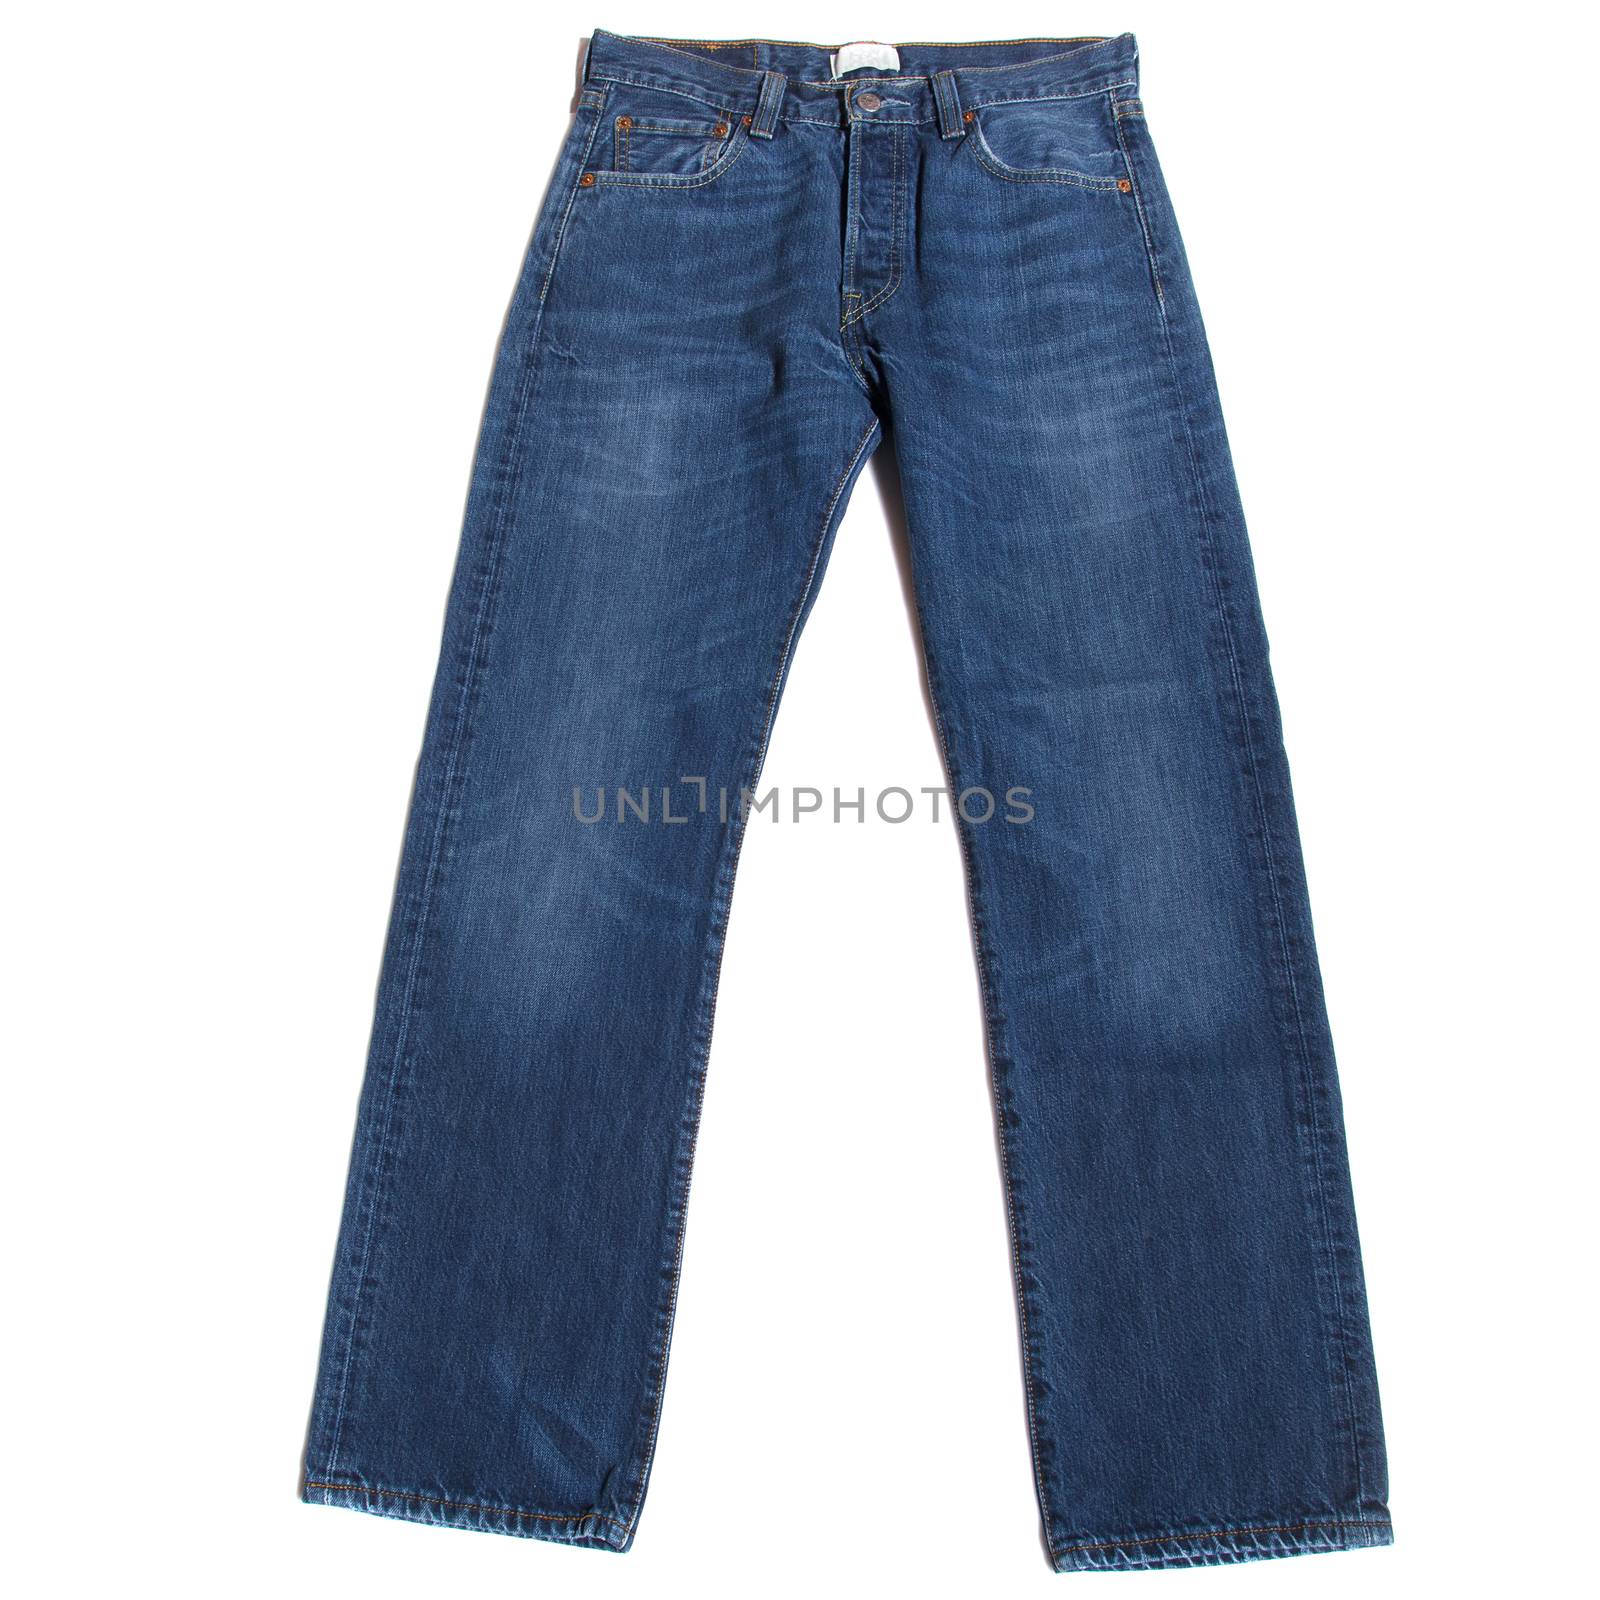 Classic blue jeans on white background